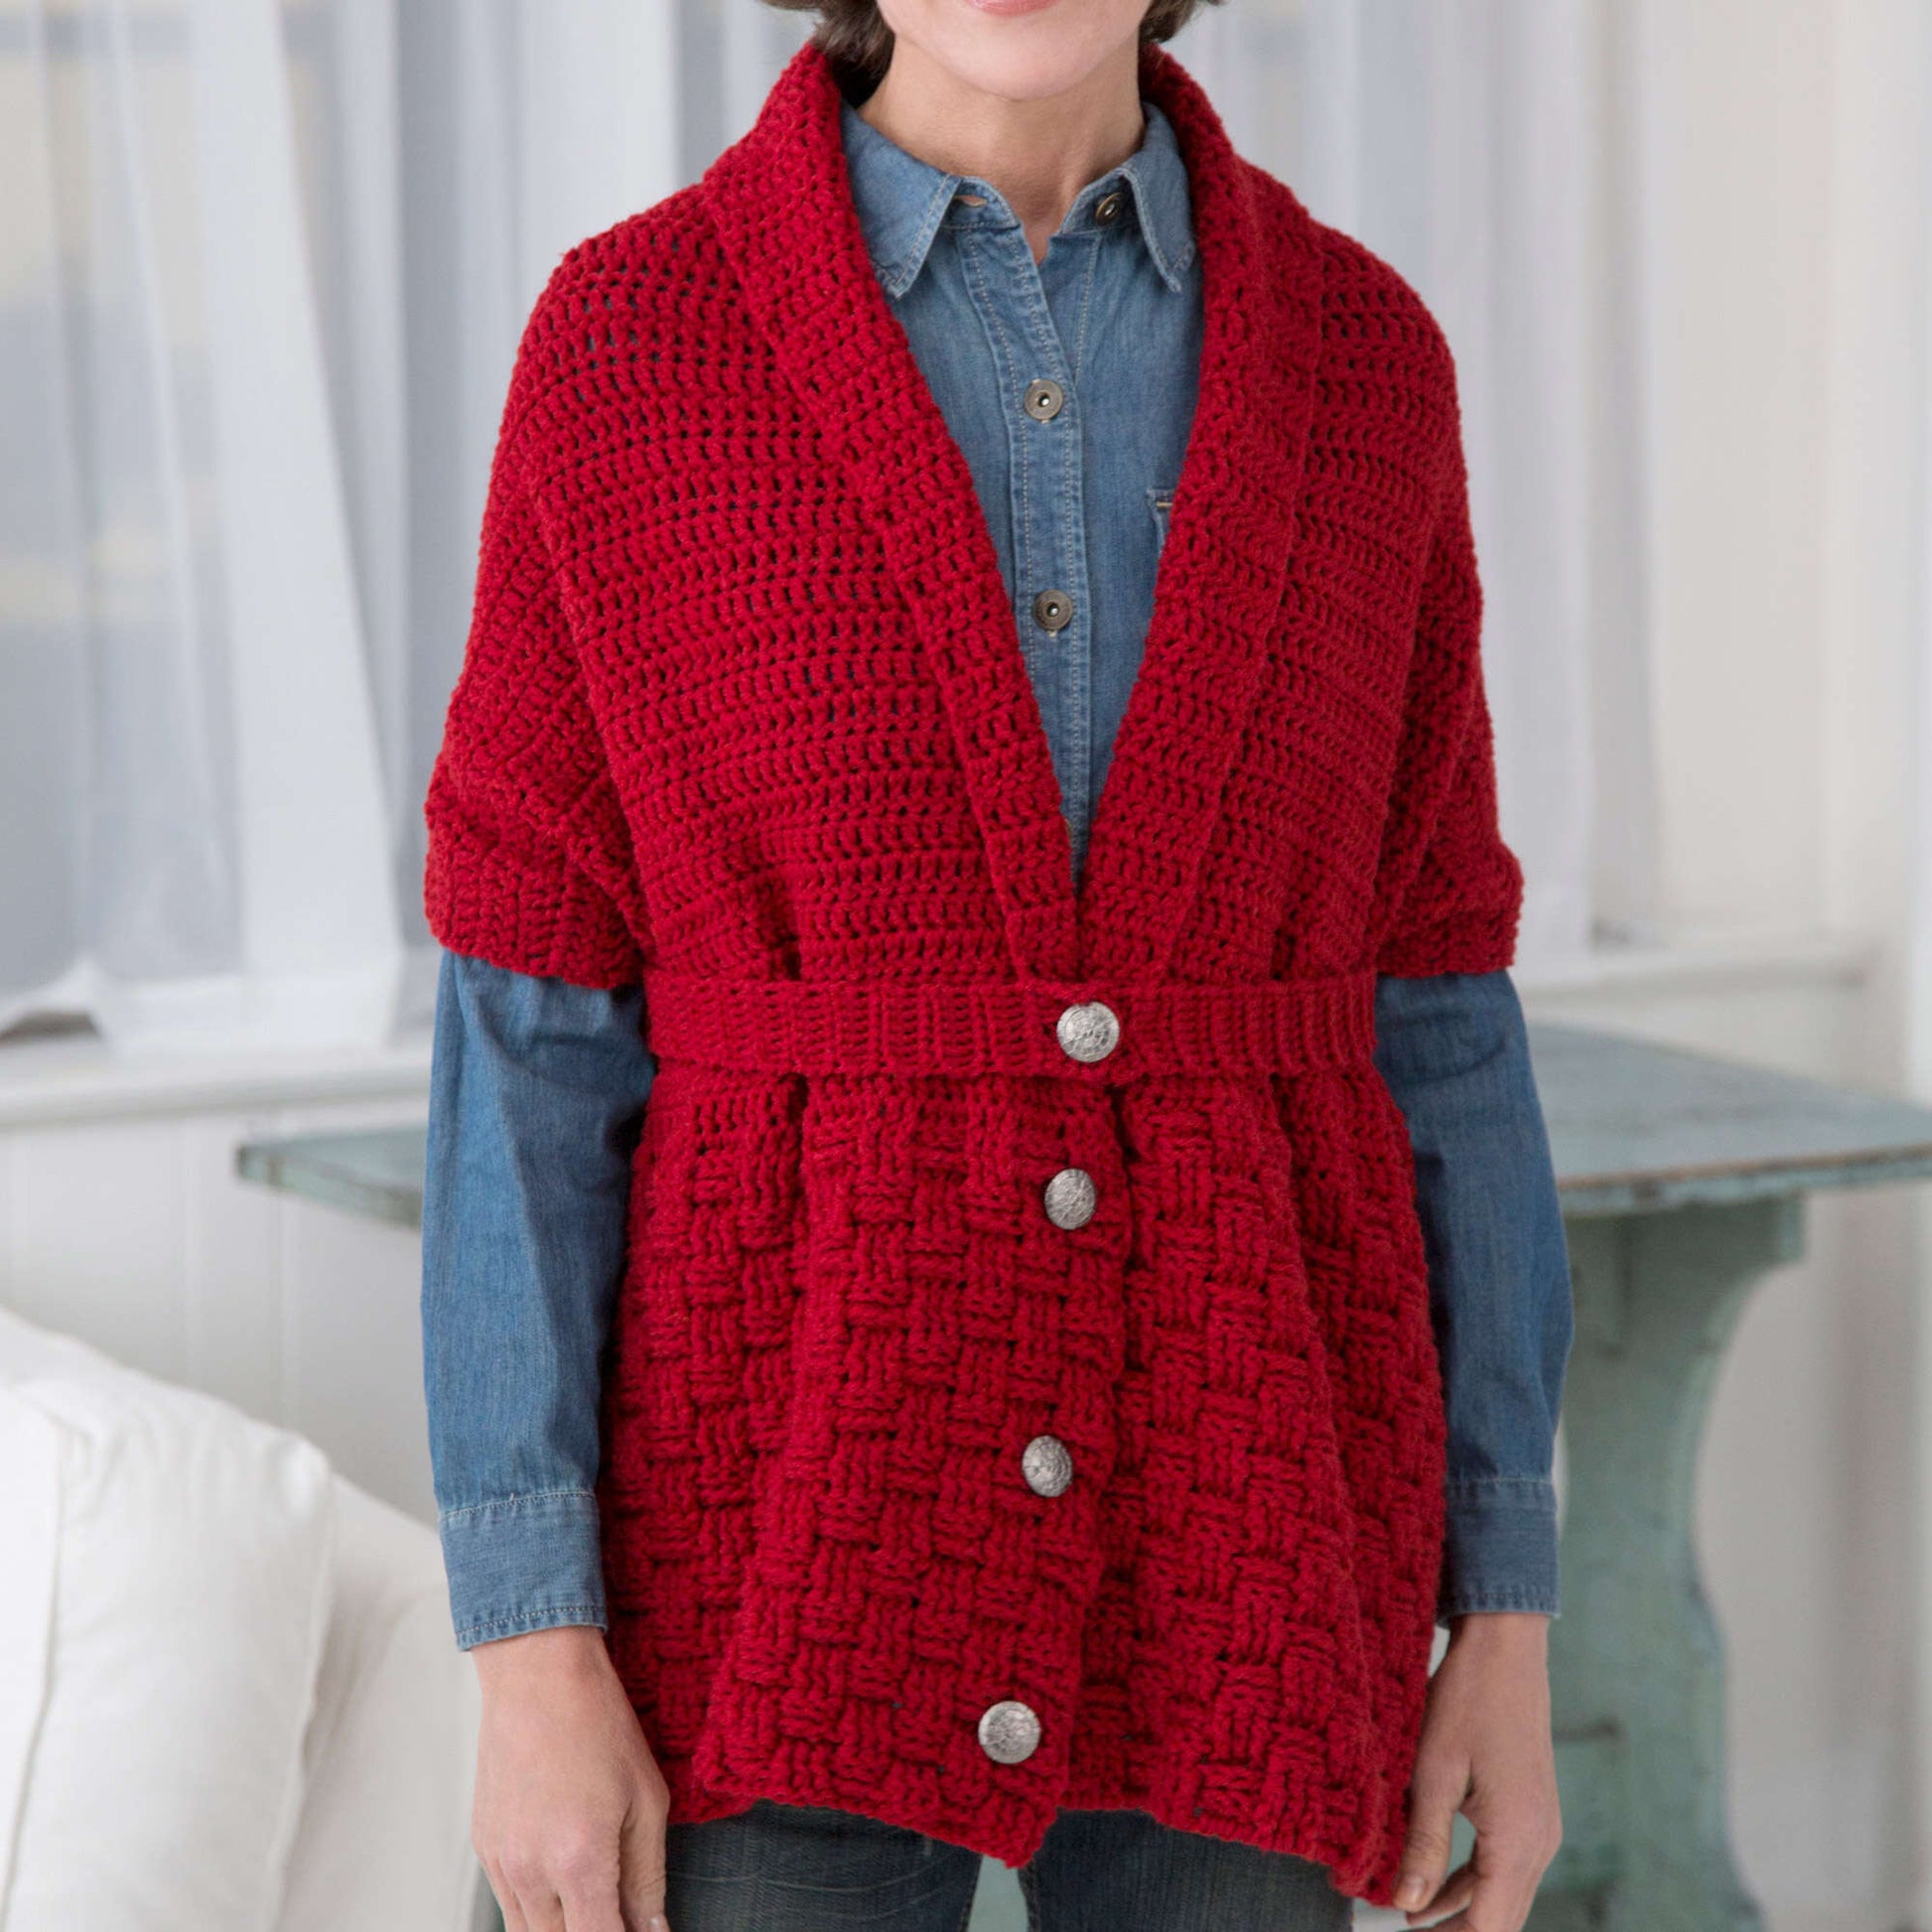 Free Red Heart Red Heart Cares Vintage Crochet Sweater Pattern